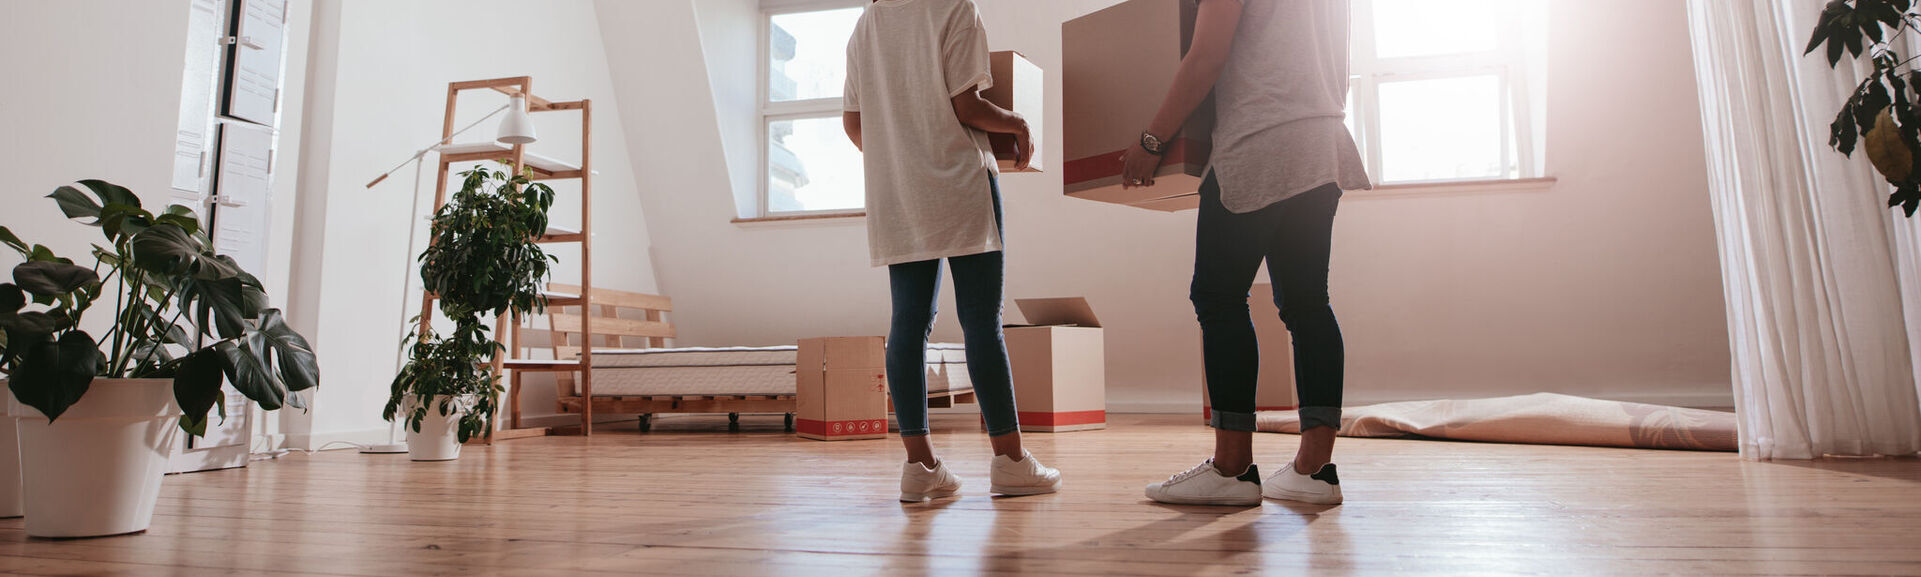 Couple in empty room with boxes 